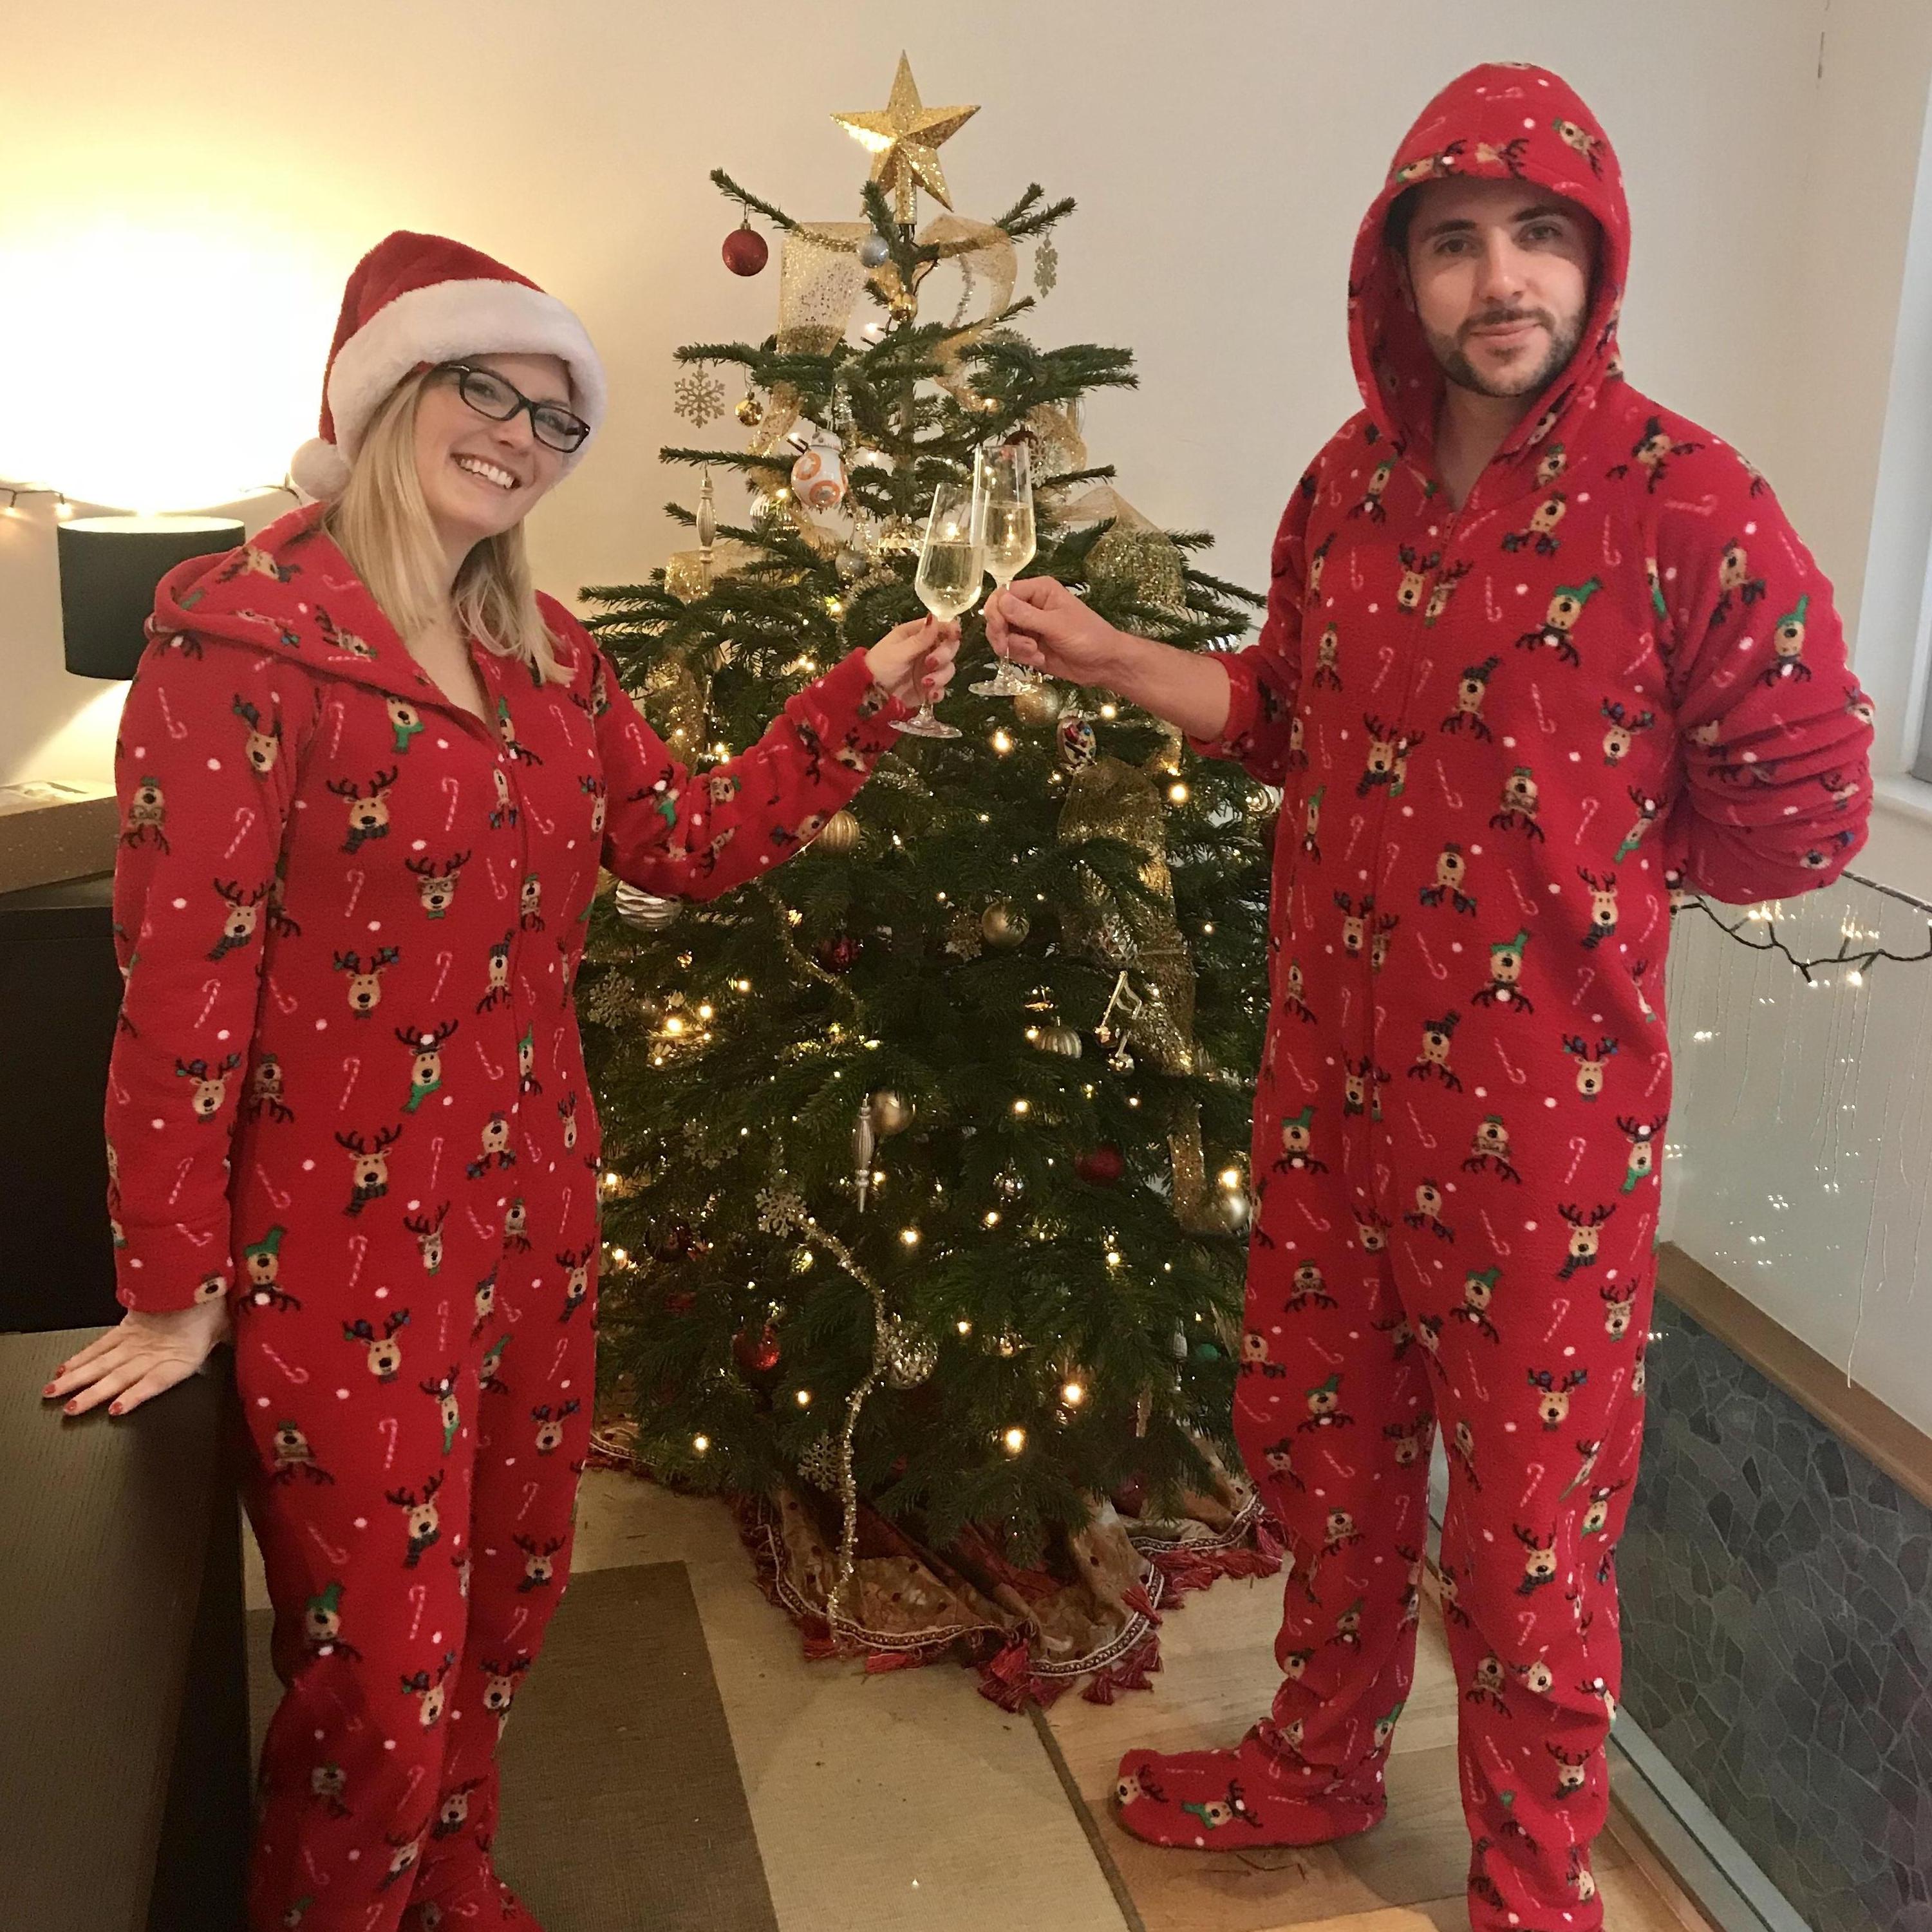 Matching onesies for our first Christmas together in London
2017